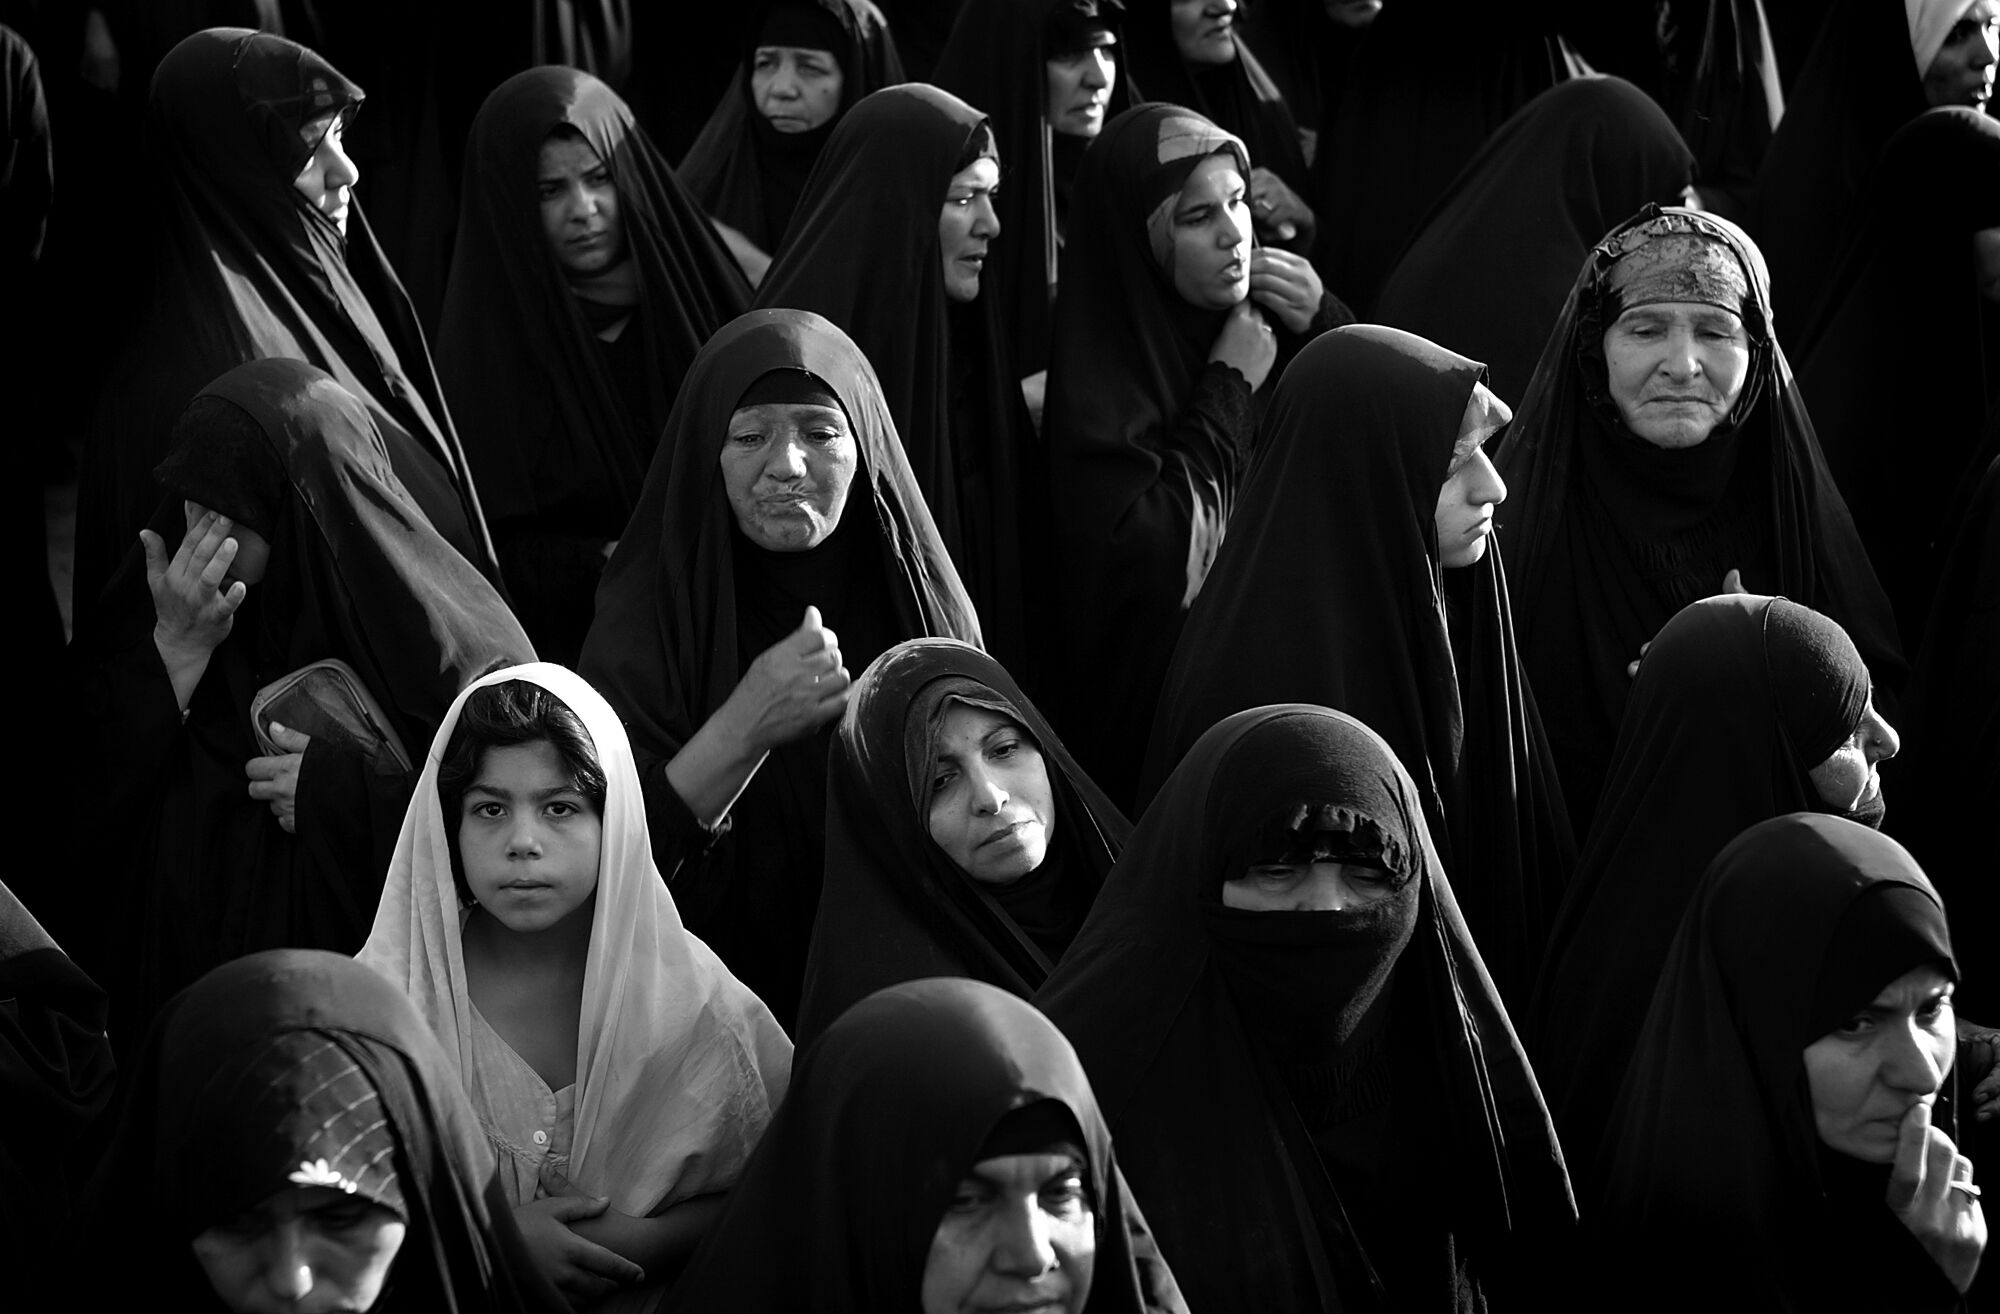 A group of women and girls in head coverings